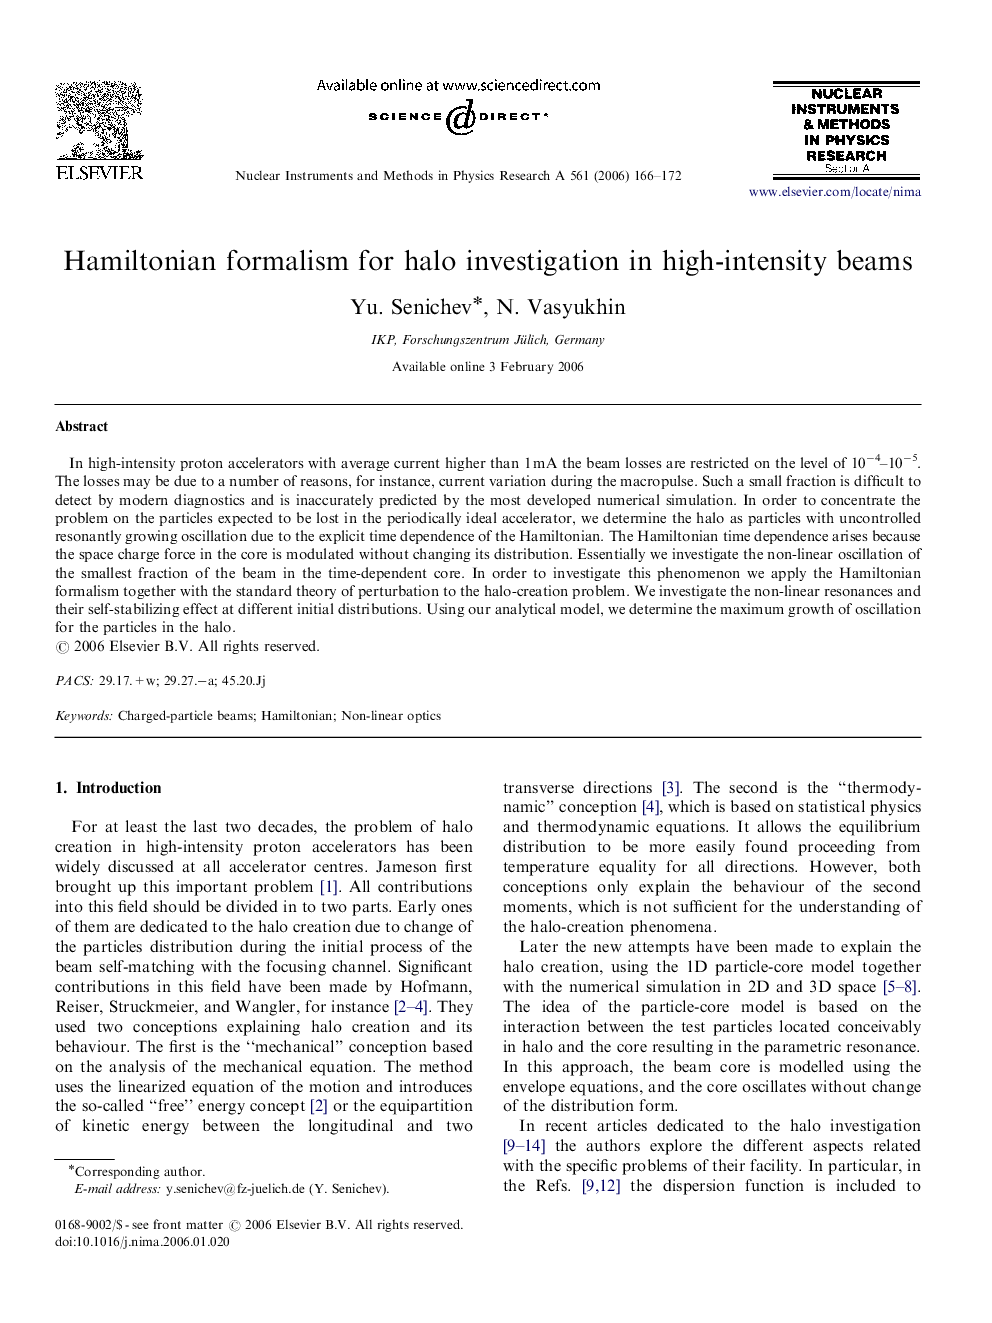 Hamiltonian formalism for halo investigation in high-intensity beams